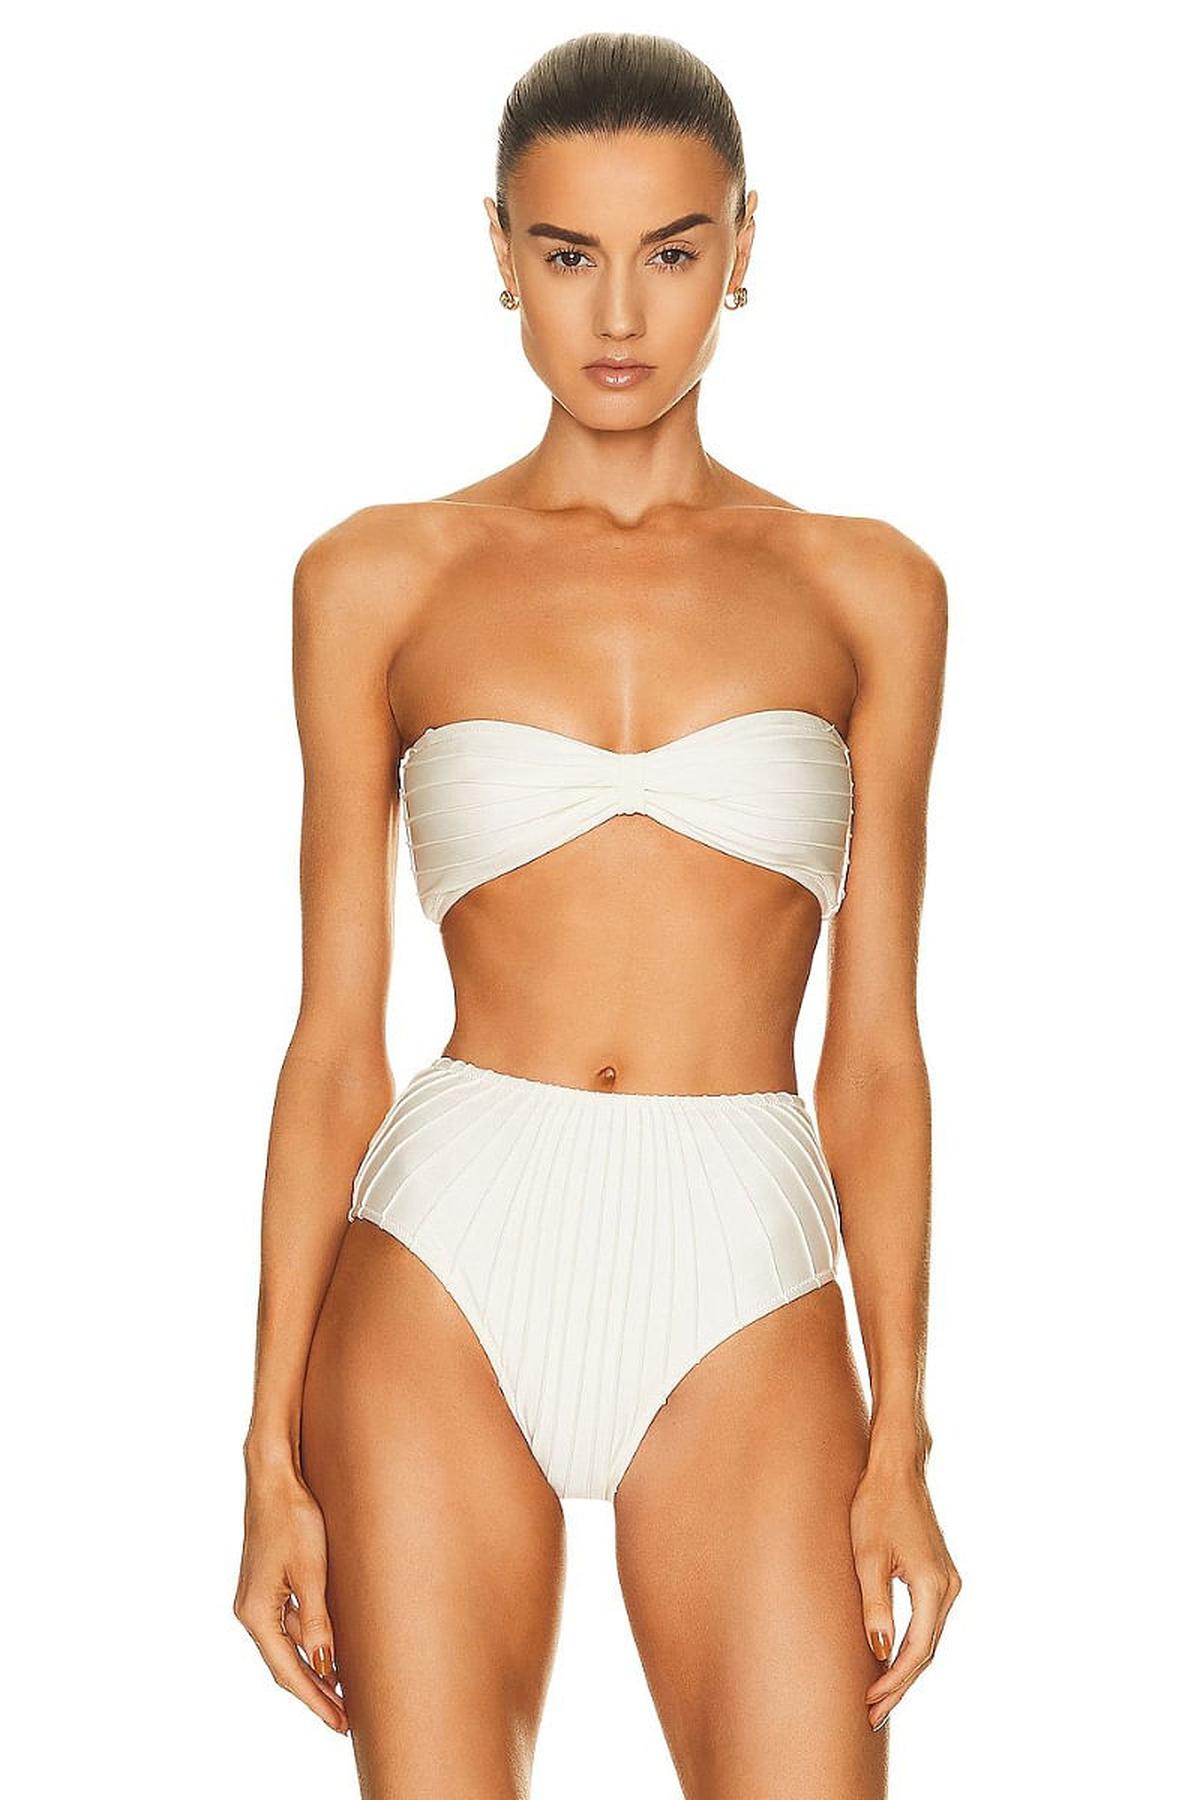 Sexy Swimsuits To Buy For Your Dream Vacation Destination